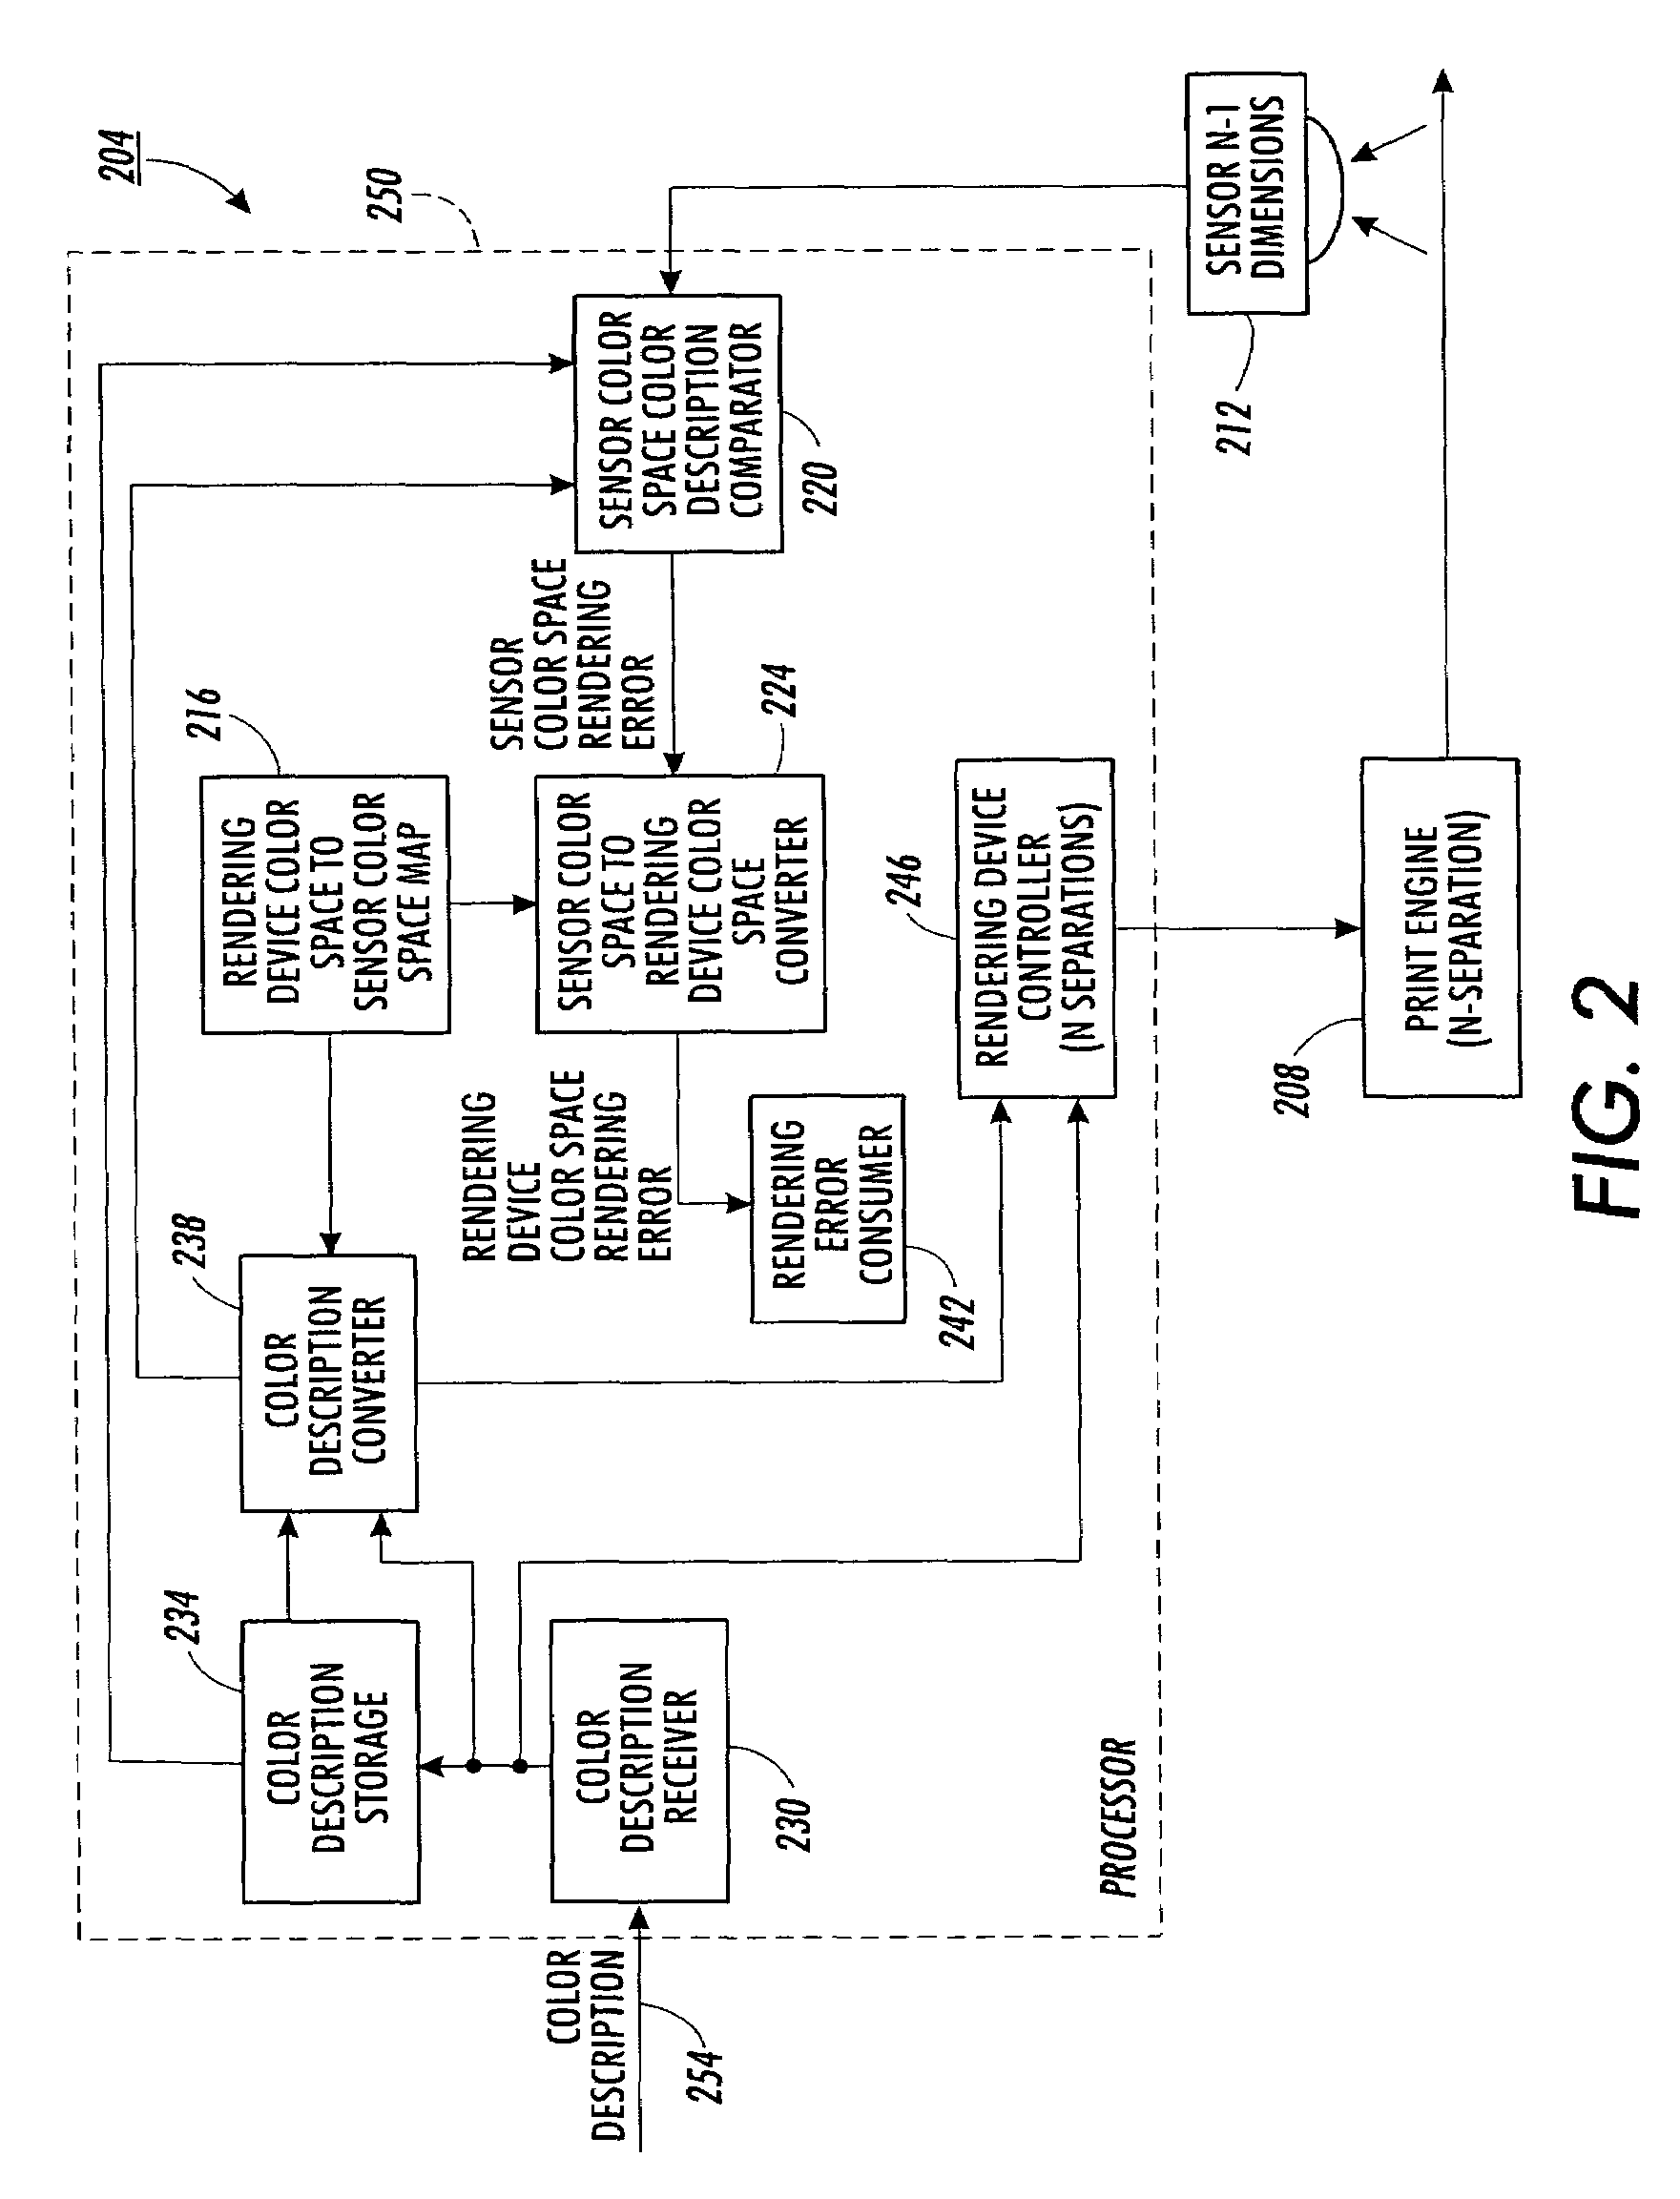 Method for calculating colorant error from reflectance measurement